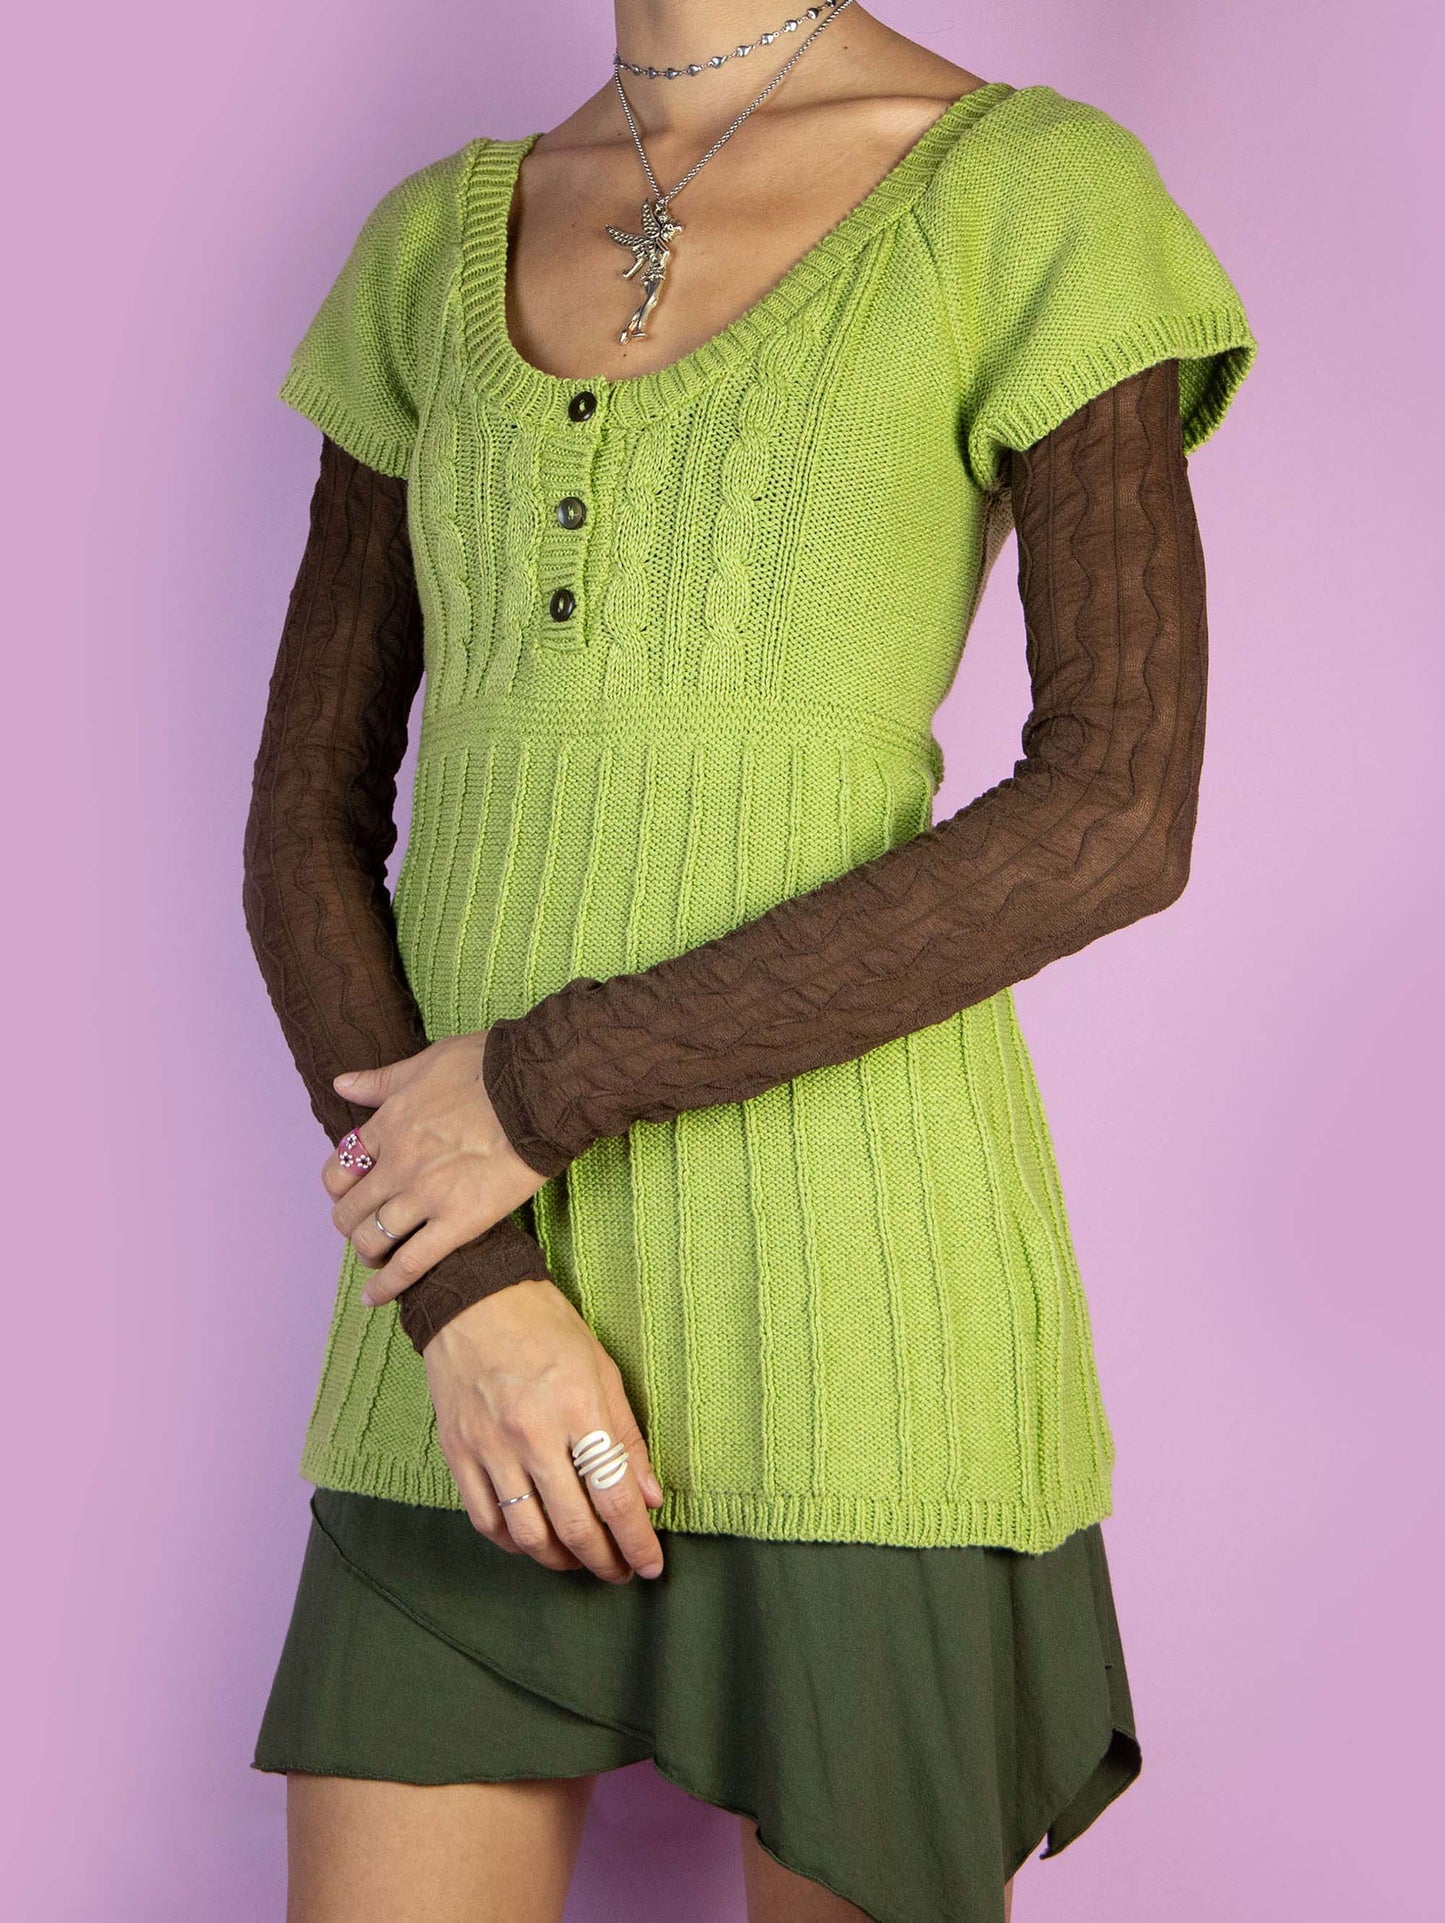 The Y2K Fairy Grunge Green Sweater is a vintage short-sleeved green jumper with a three-button detail. Cyber boho 2000s knitted pullover.